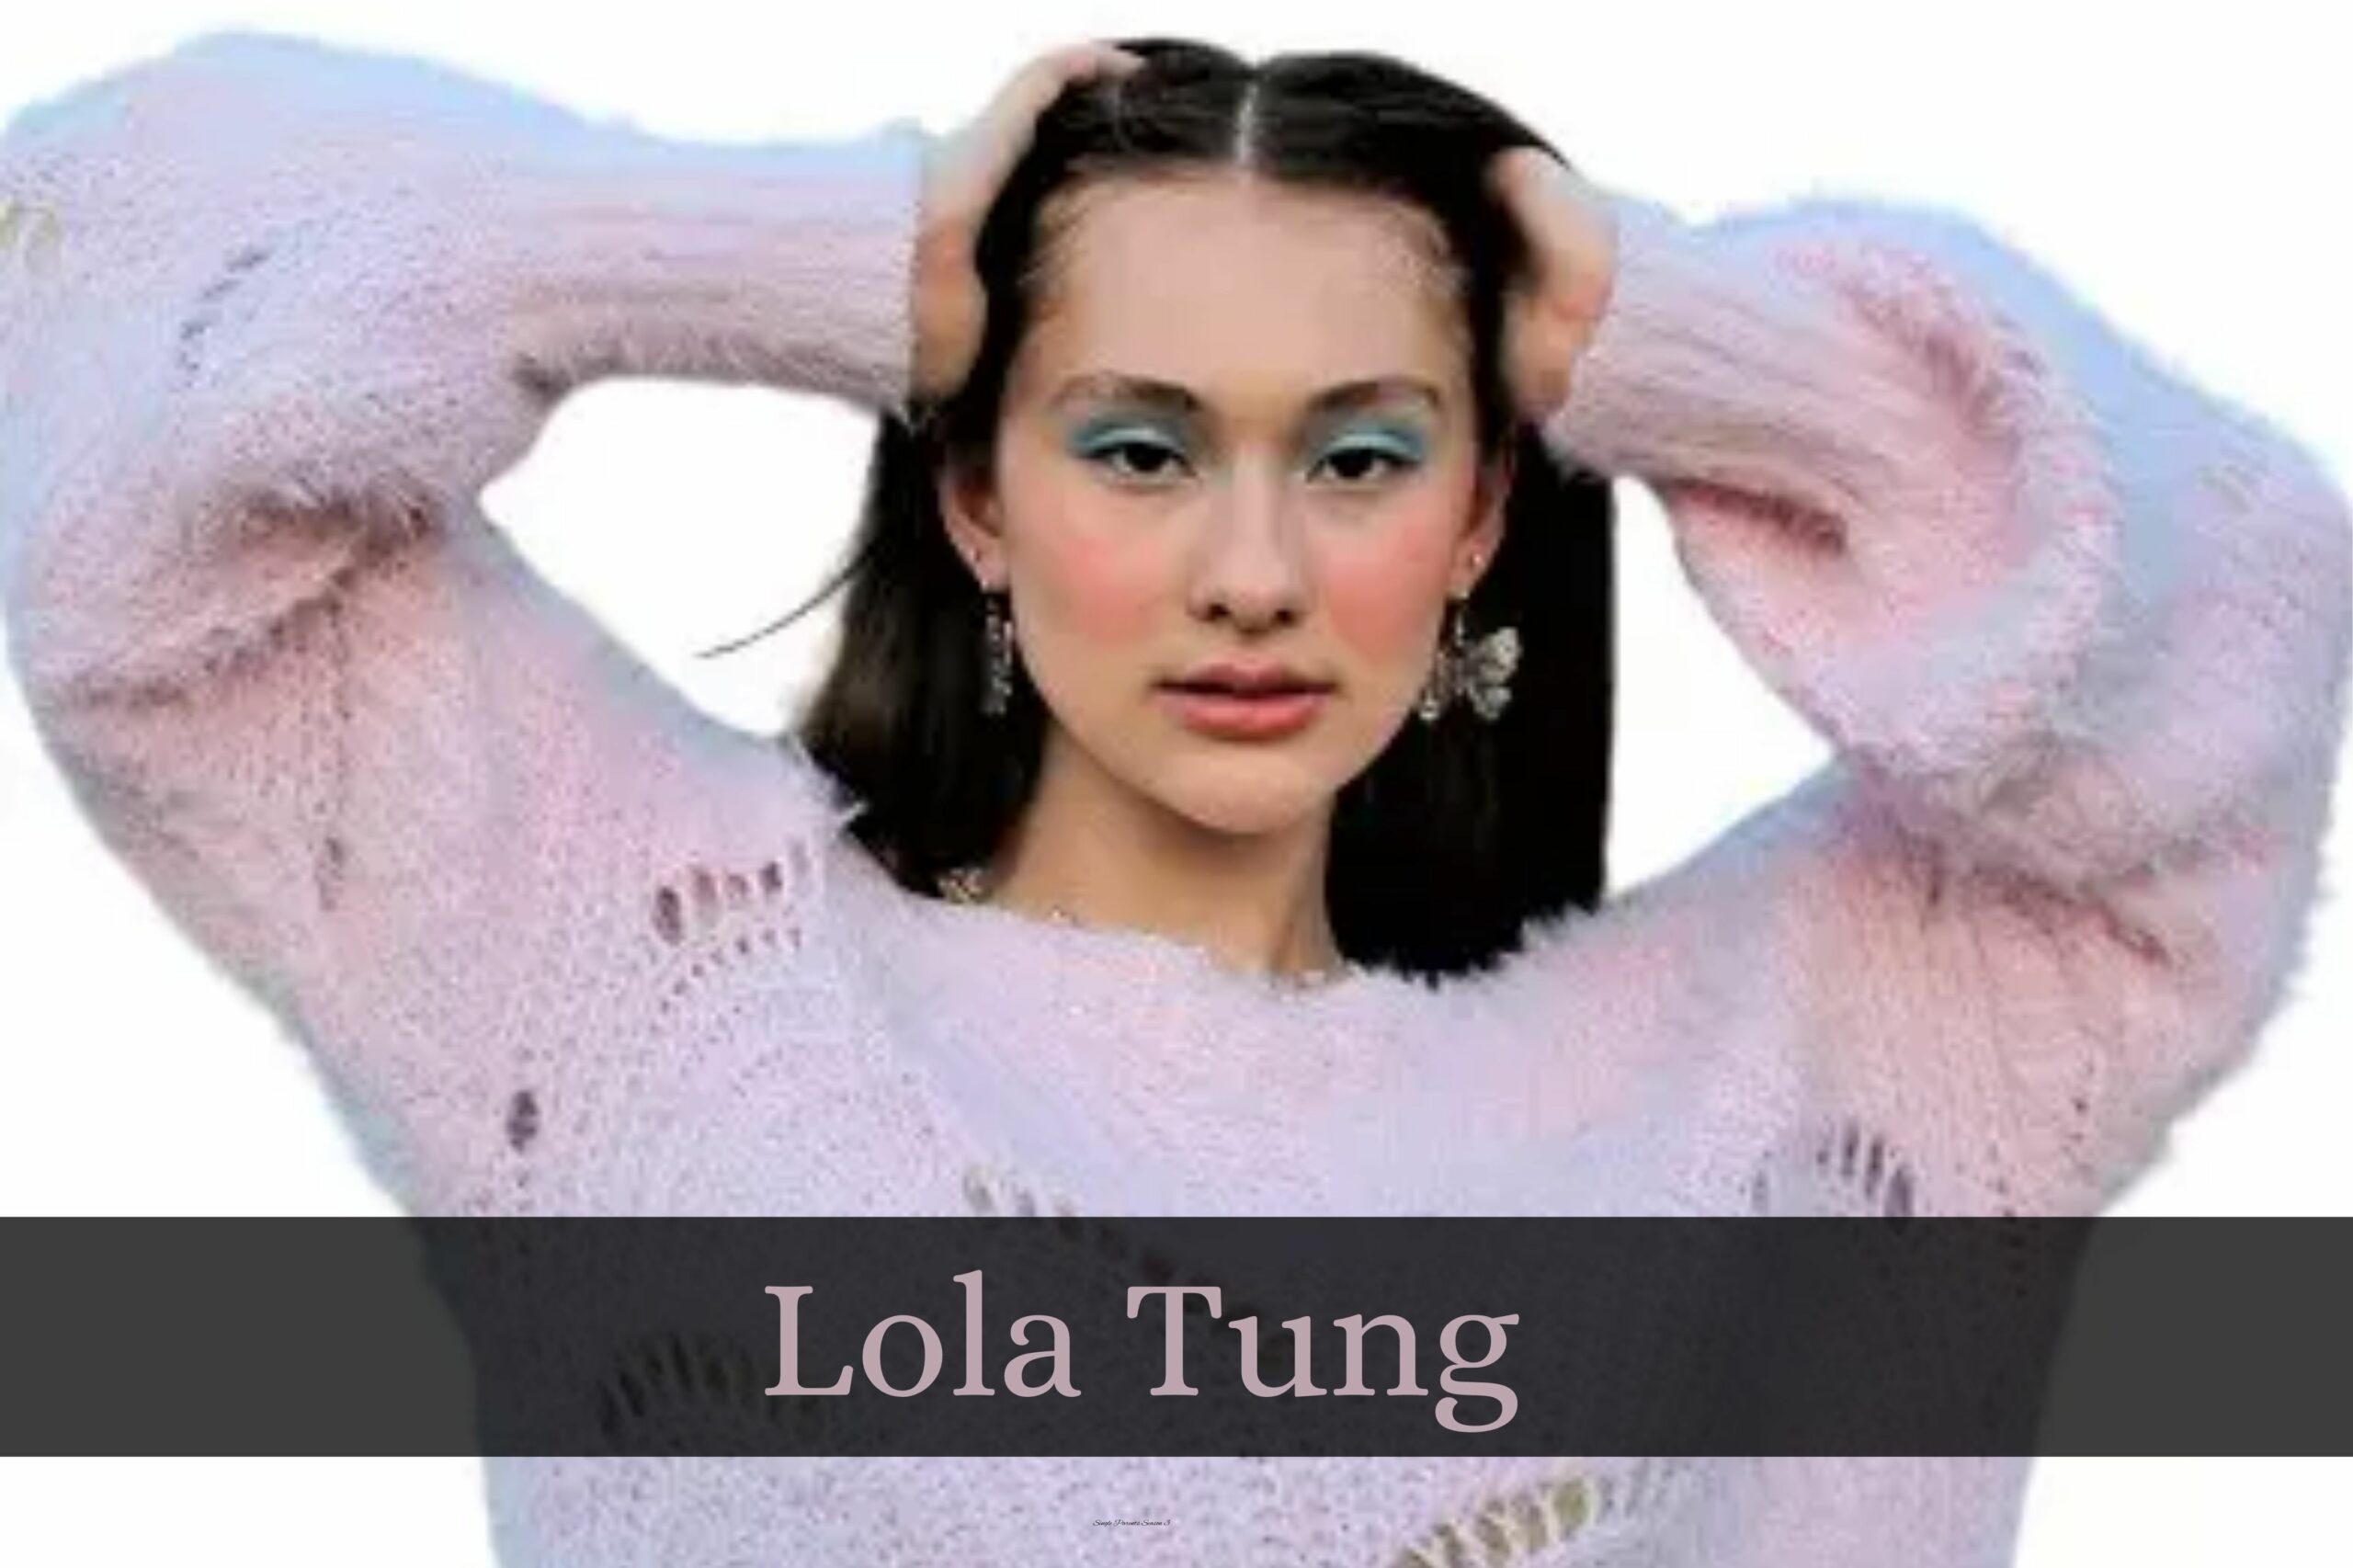 Who Is Lola Tung Dating Now? Is It True That She Has Never Been In A Relationship?